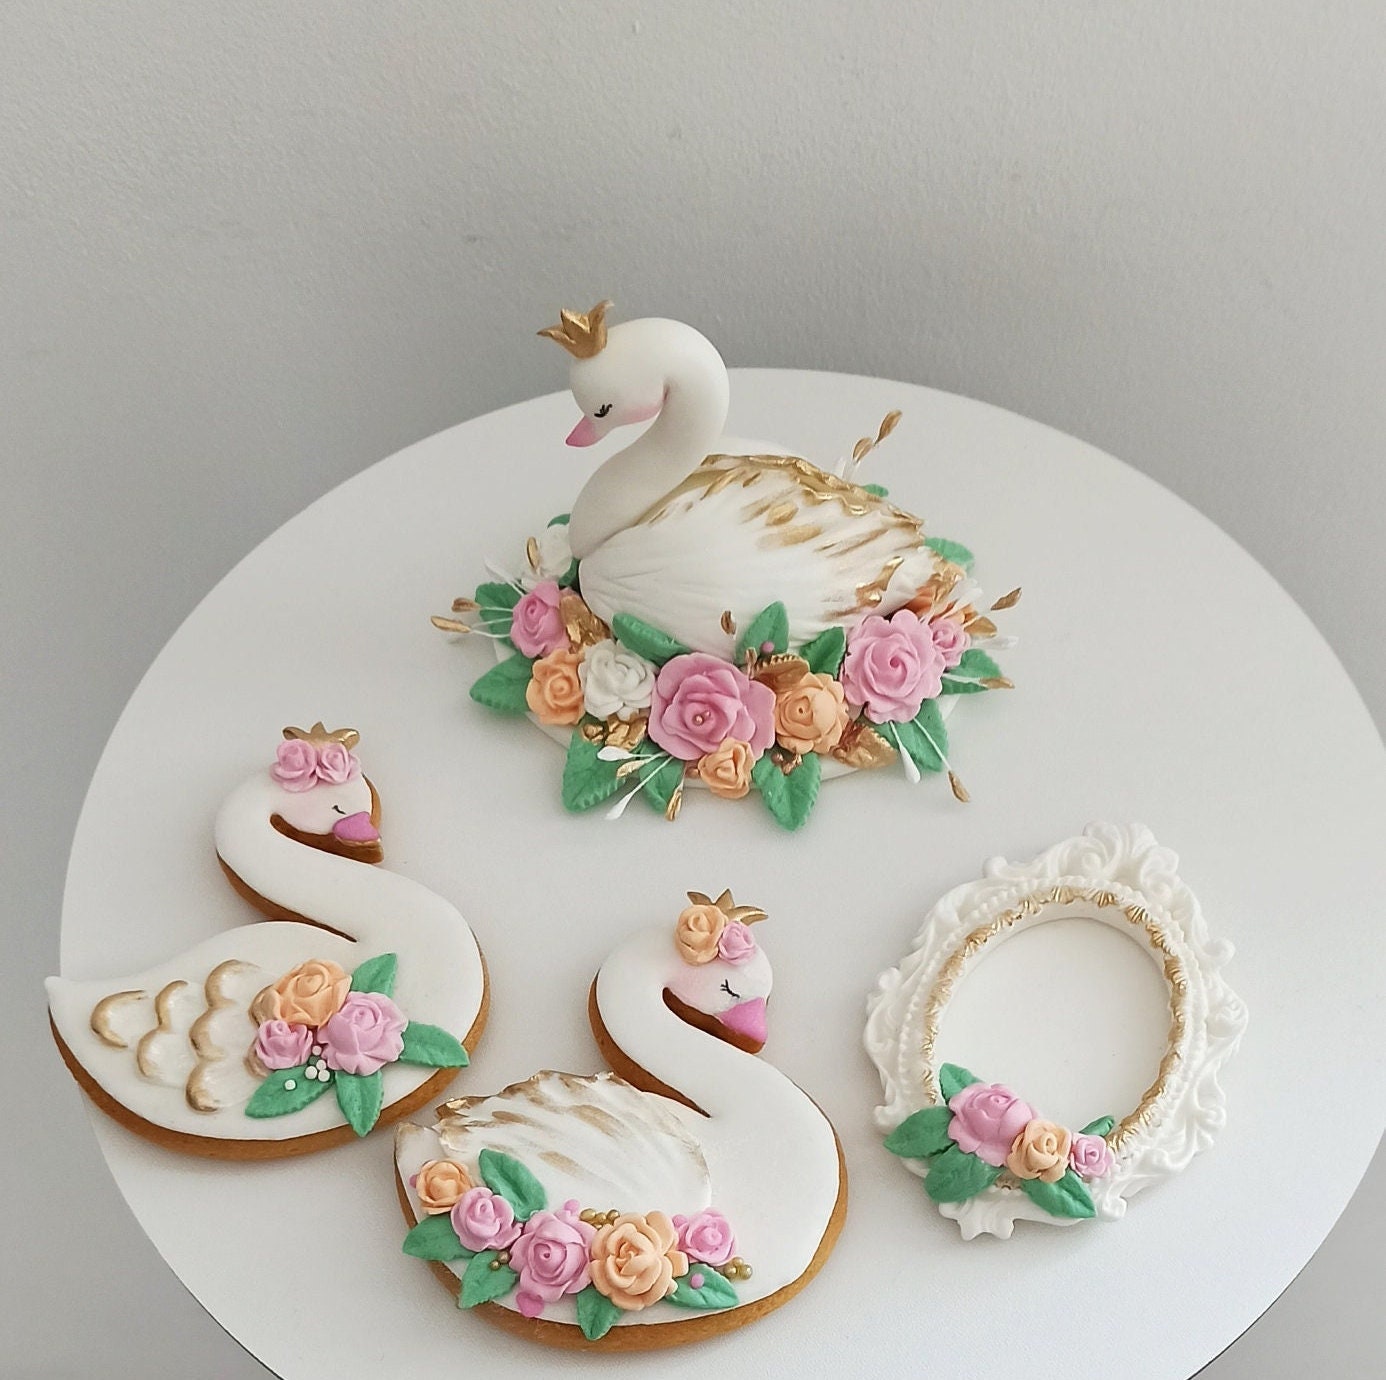 Wedding Cake top stand accessories 2 swans clear 